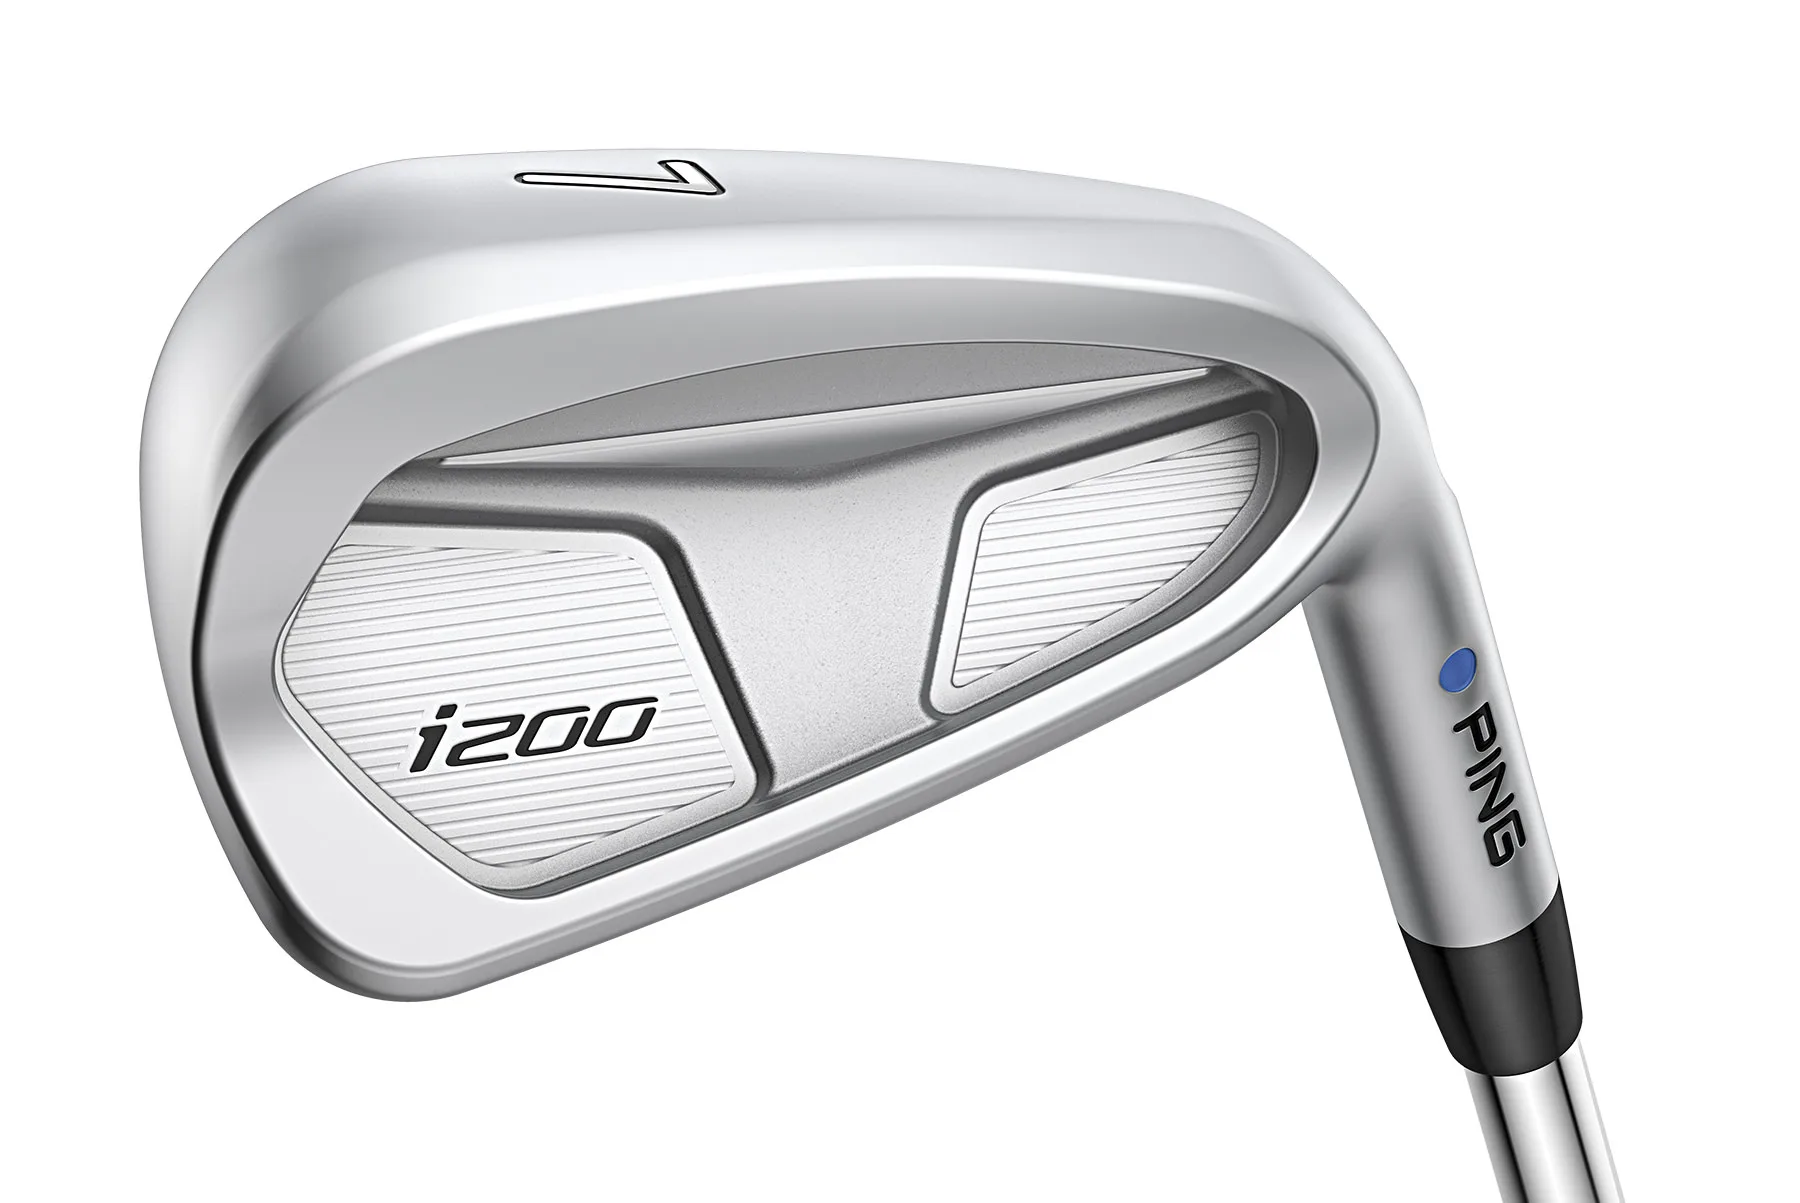 Ping i200 irons